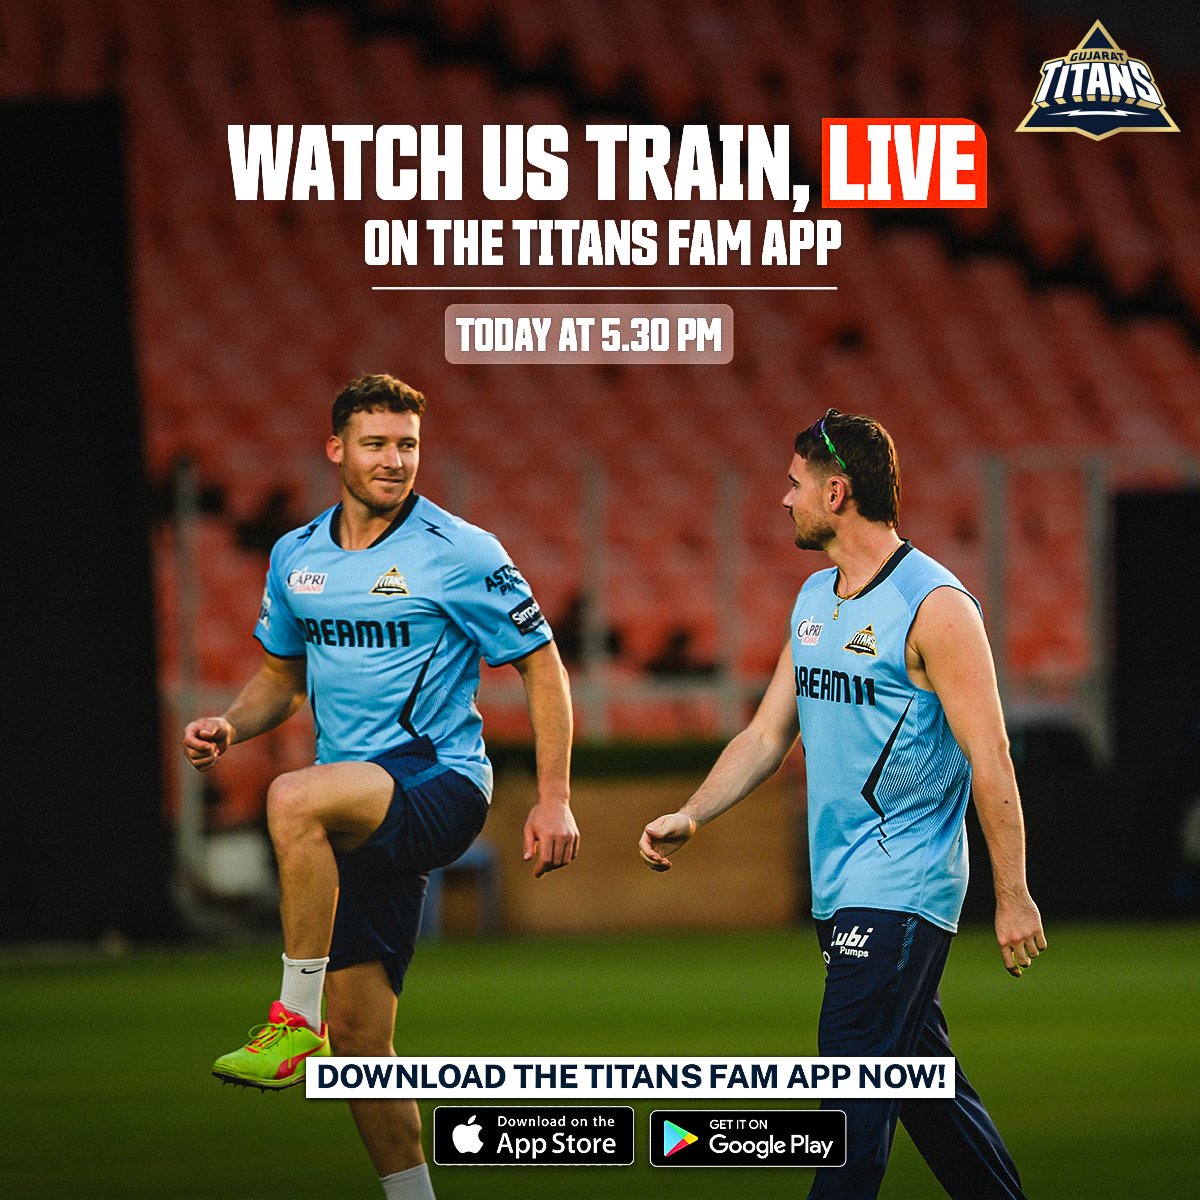 Don't Miss! Watch the 𝙏𝙞𝙩𝙖𝙣𝙨 𝙪𝙣𝙛𝙞𝙡𝙩𝙚𝙧𝙚𝙙 from training today at 5.30 PM... only on Titans FAM App! 📹 Download the app now! 🔗 - gujarattitansipl.page.link/home #AavaDe | #GTKarshe